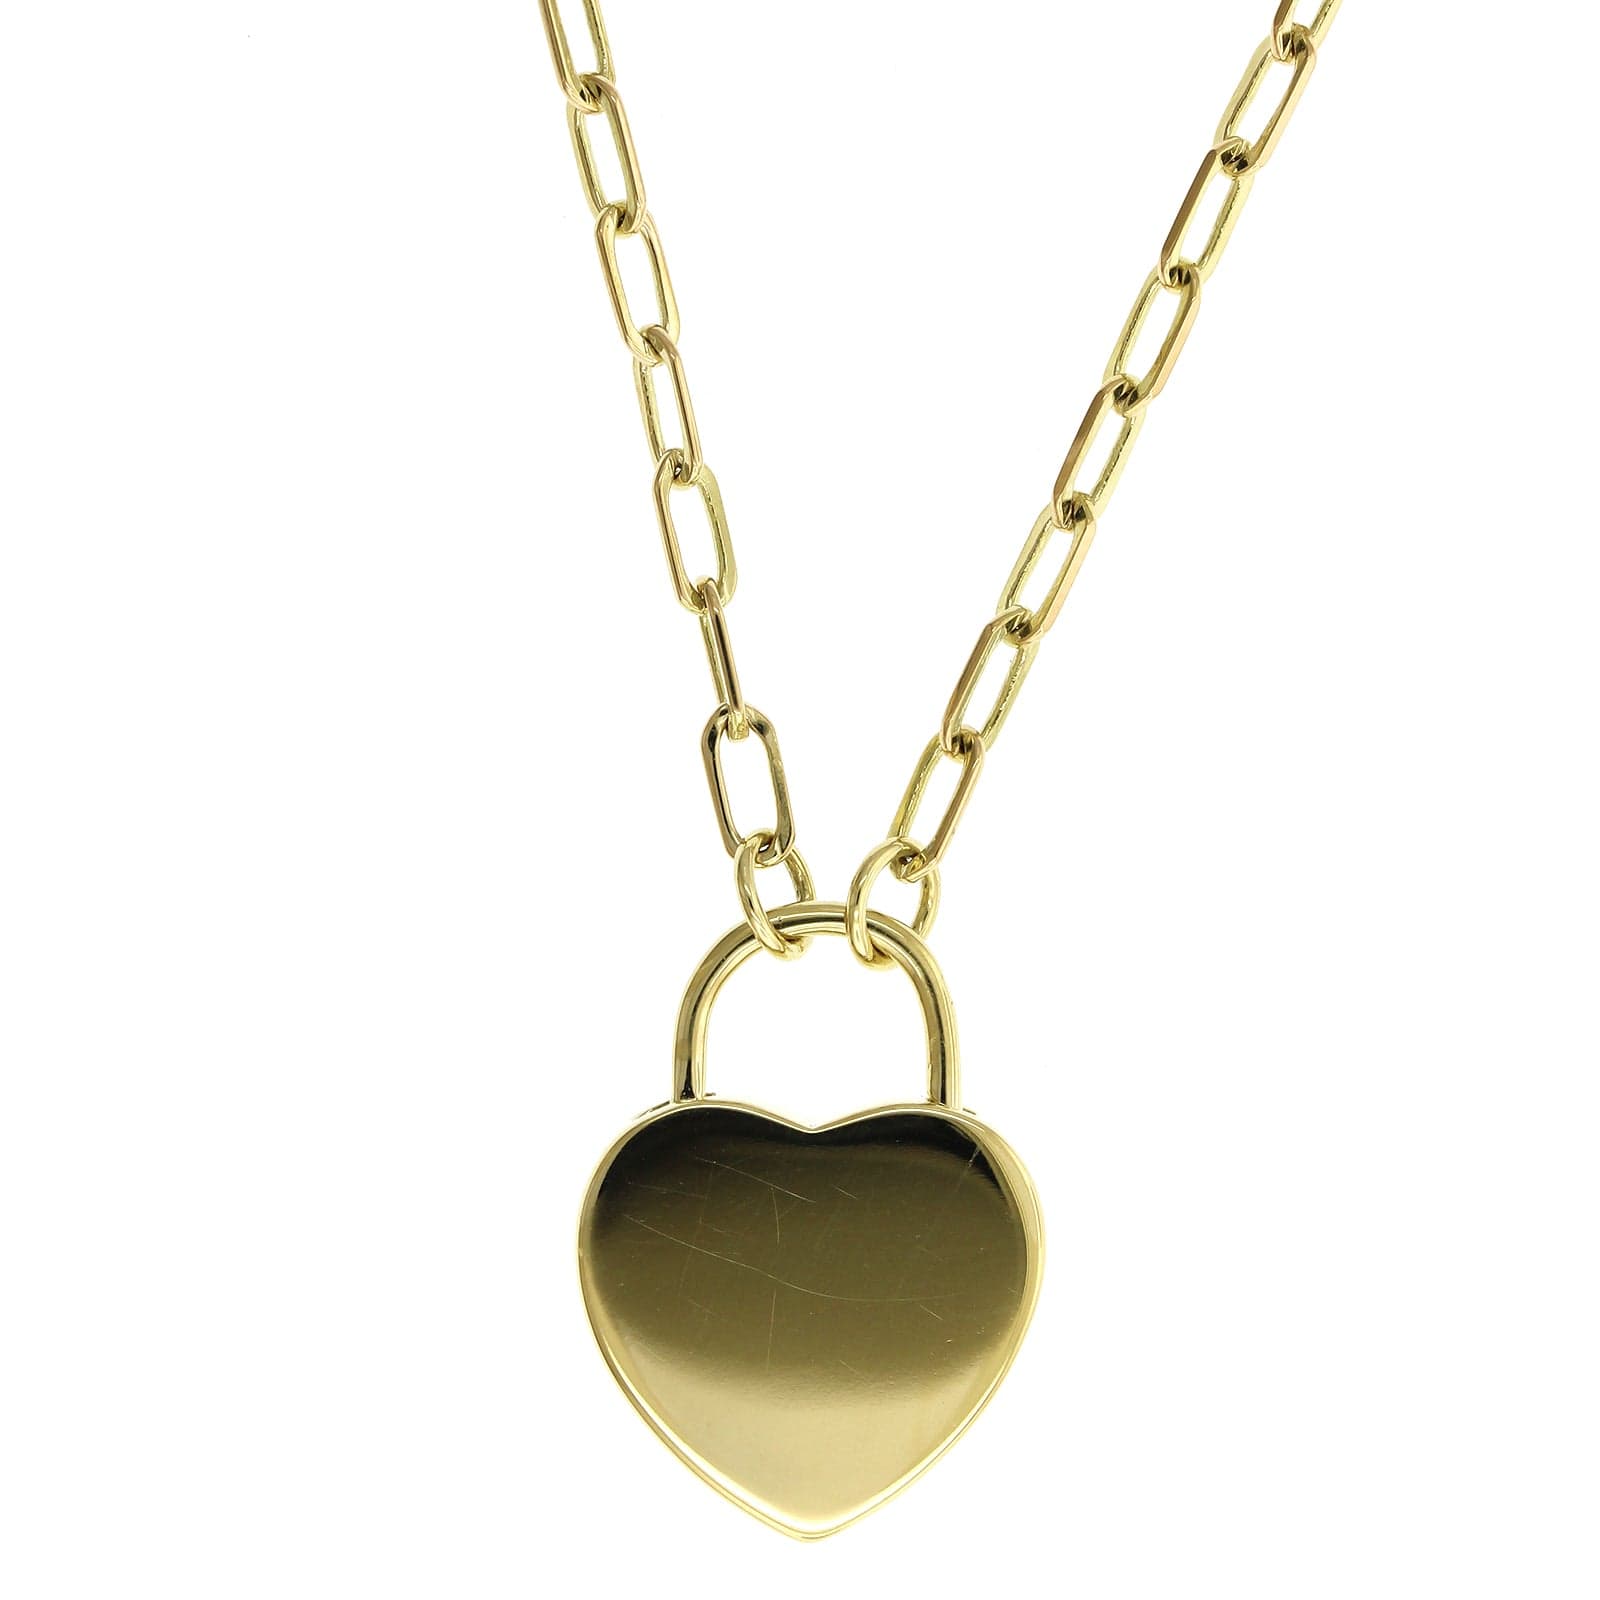 Penny Preville 18K Yellow Gold Diamond Heart Charm Lock Necklace